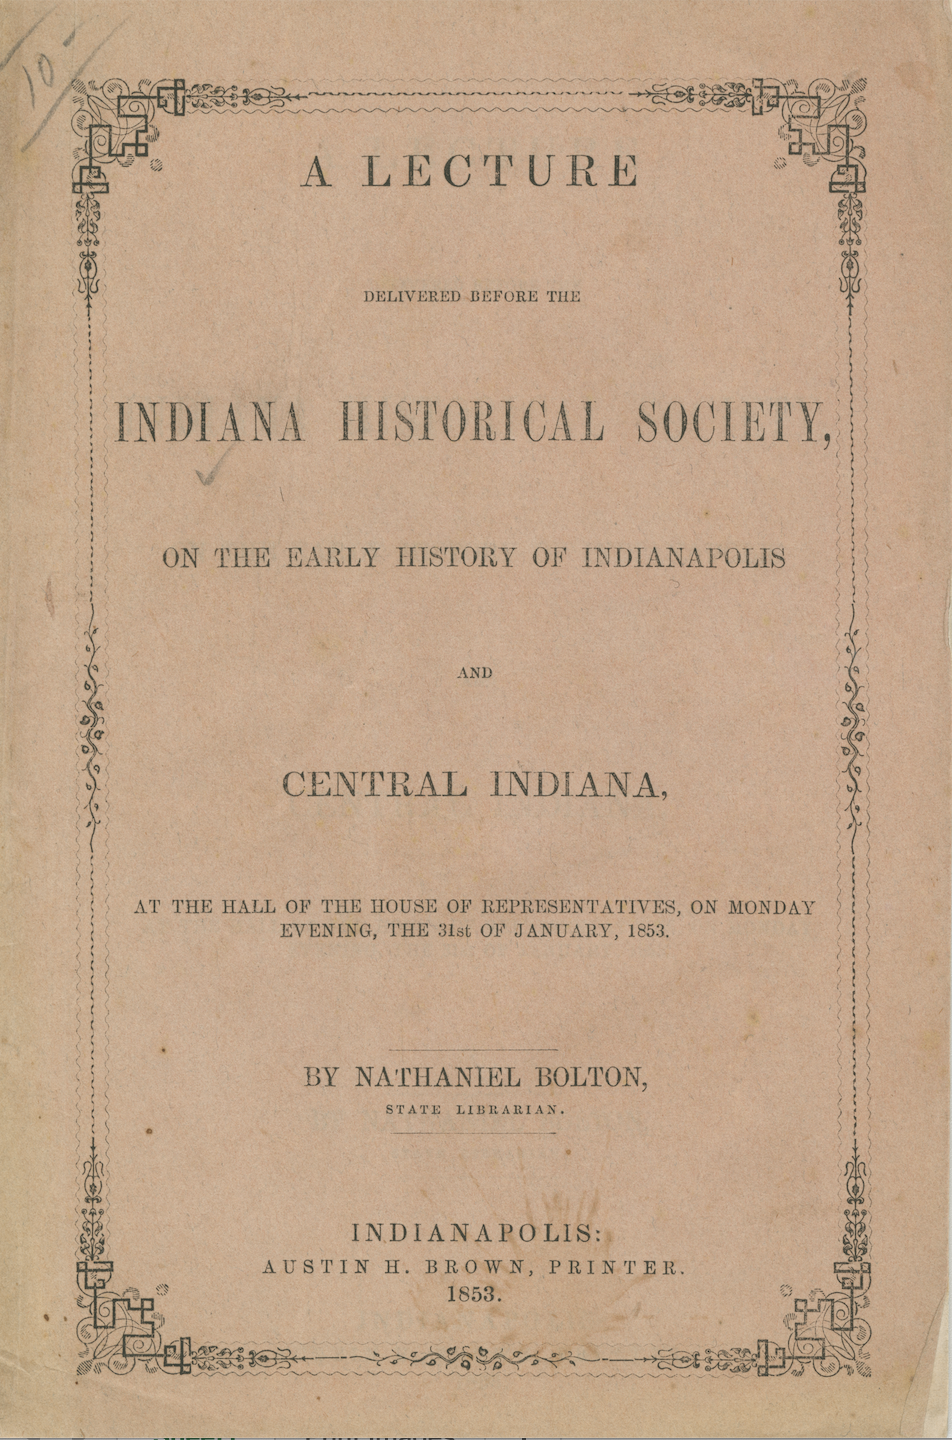 An aged poster announcing the lecture reads "A Lecture delivered before The Indiana Historical Society, on the early history of Indianapolis and Central Ind., at the Hall of the House of Representatives, on Monday Evening, the 31st of January. 1853. By Nathaniel Bolton State Librarian.